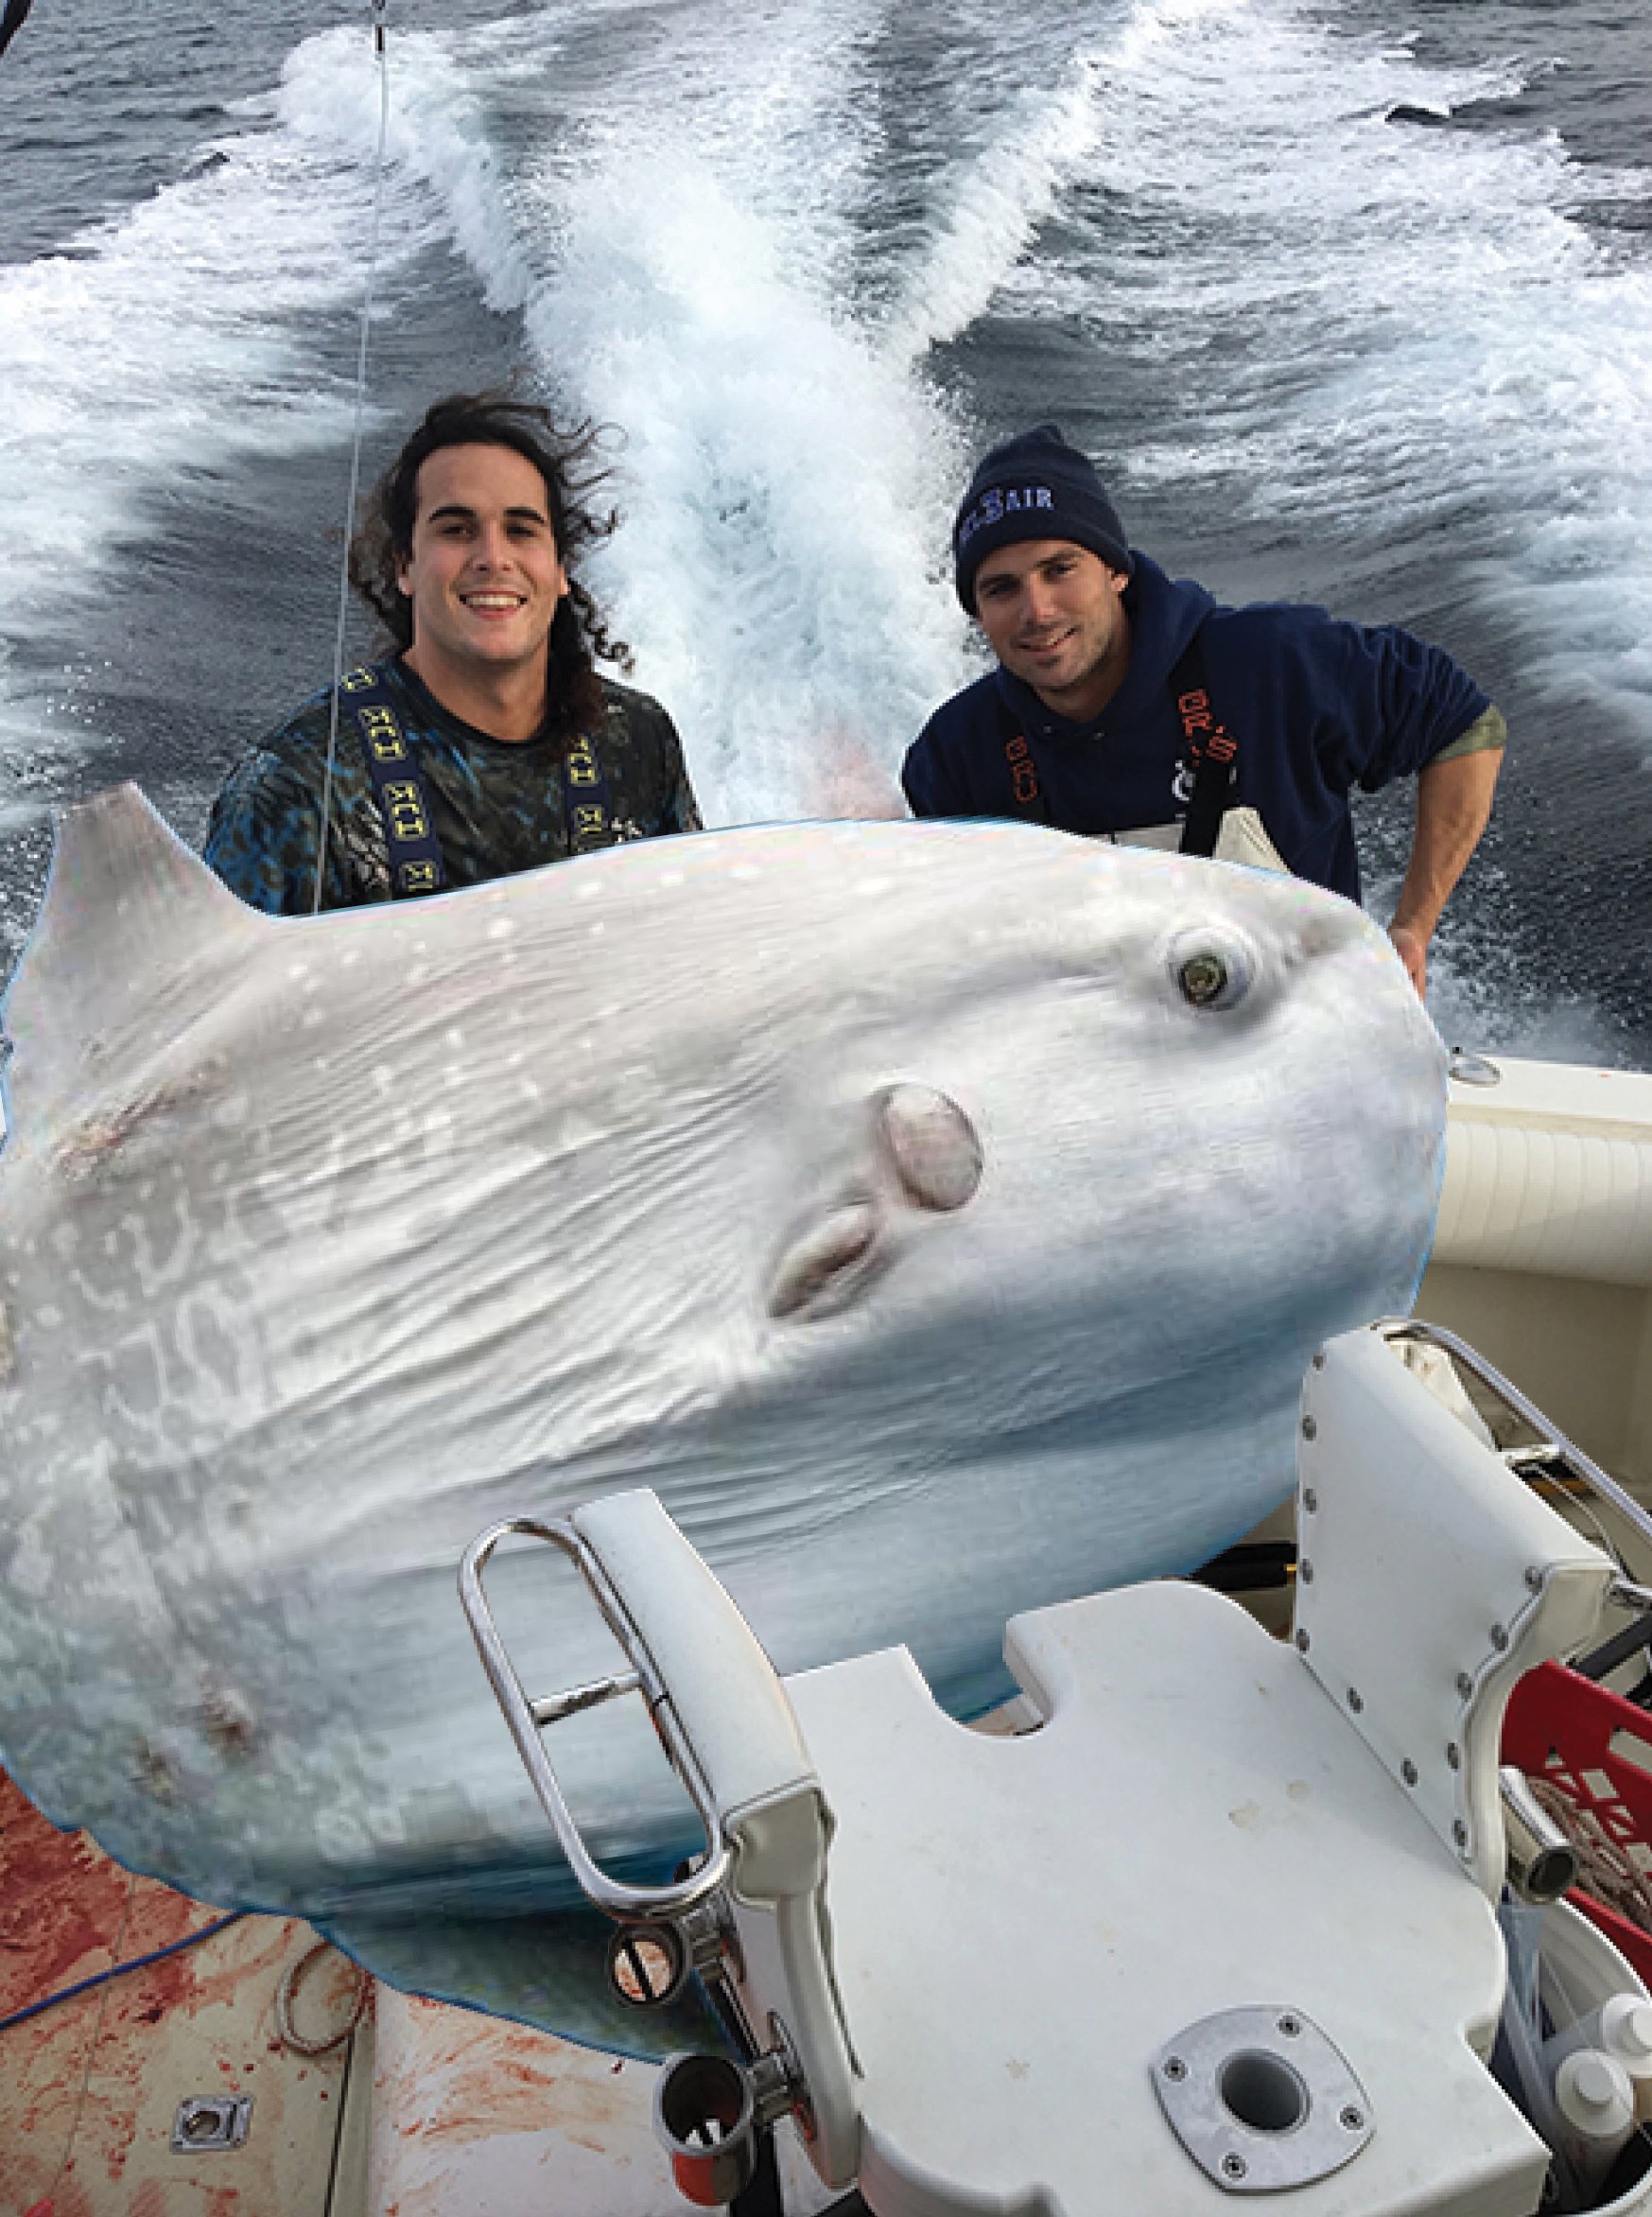 Primary Search Lands 669 Pound Ocean Sunfish